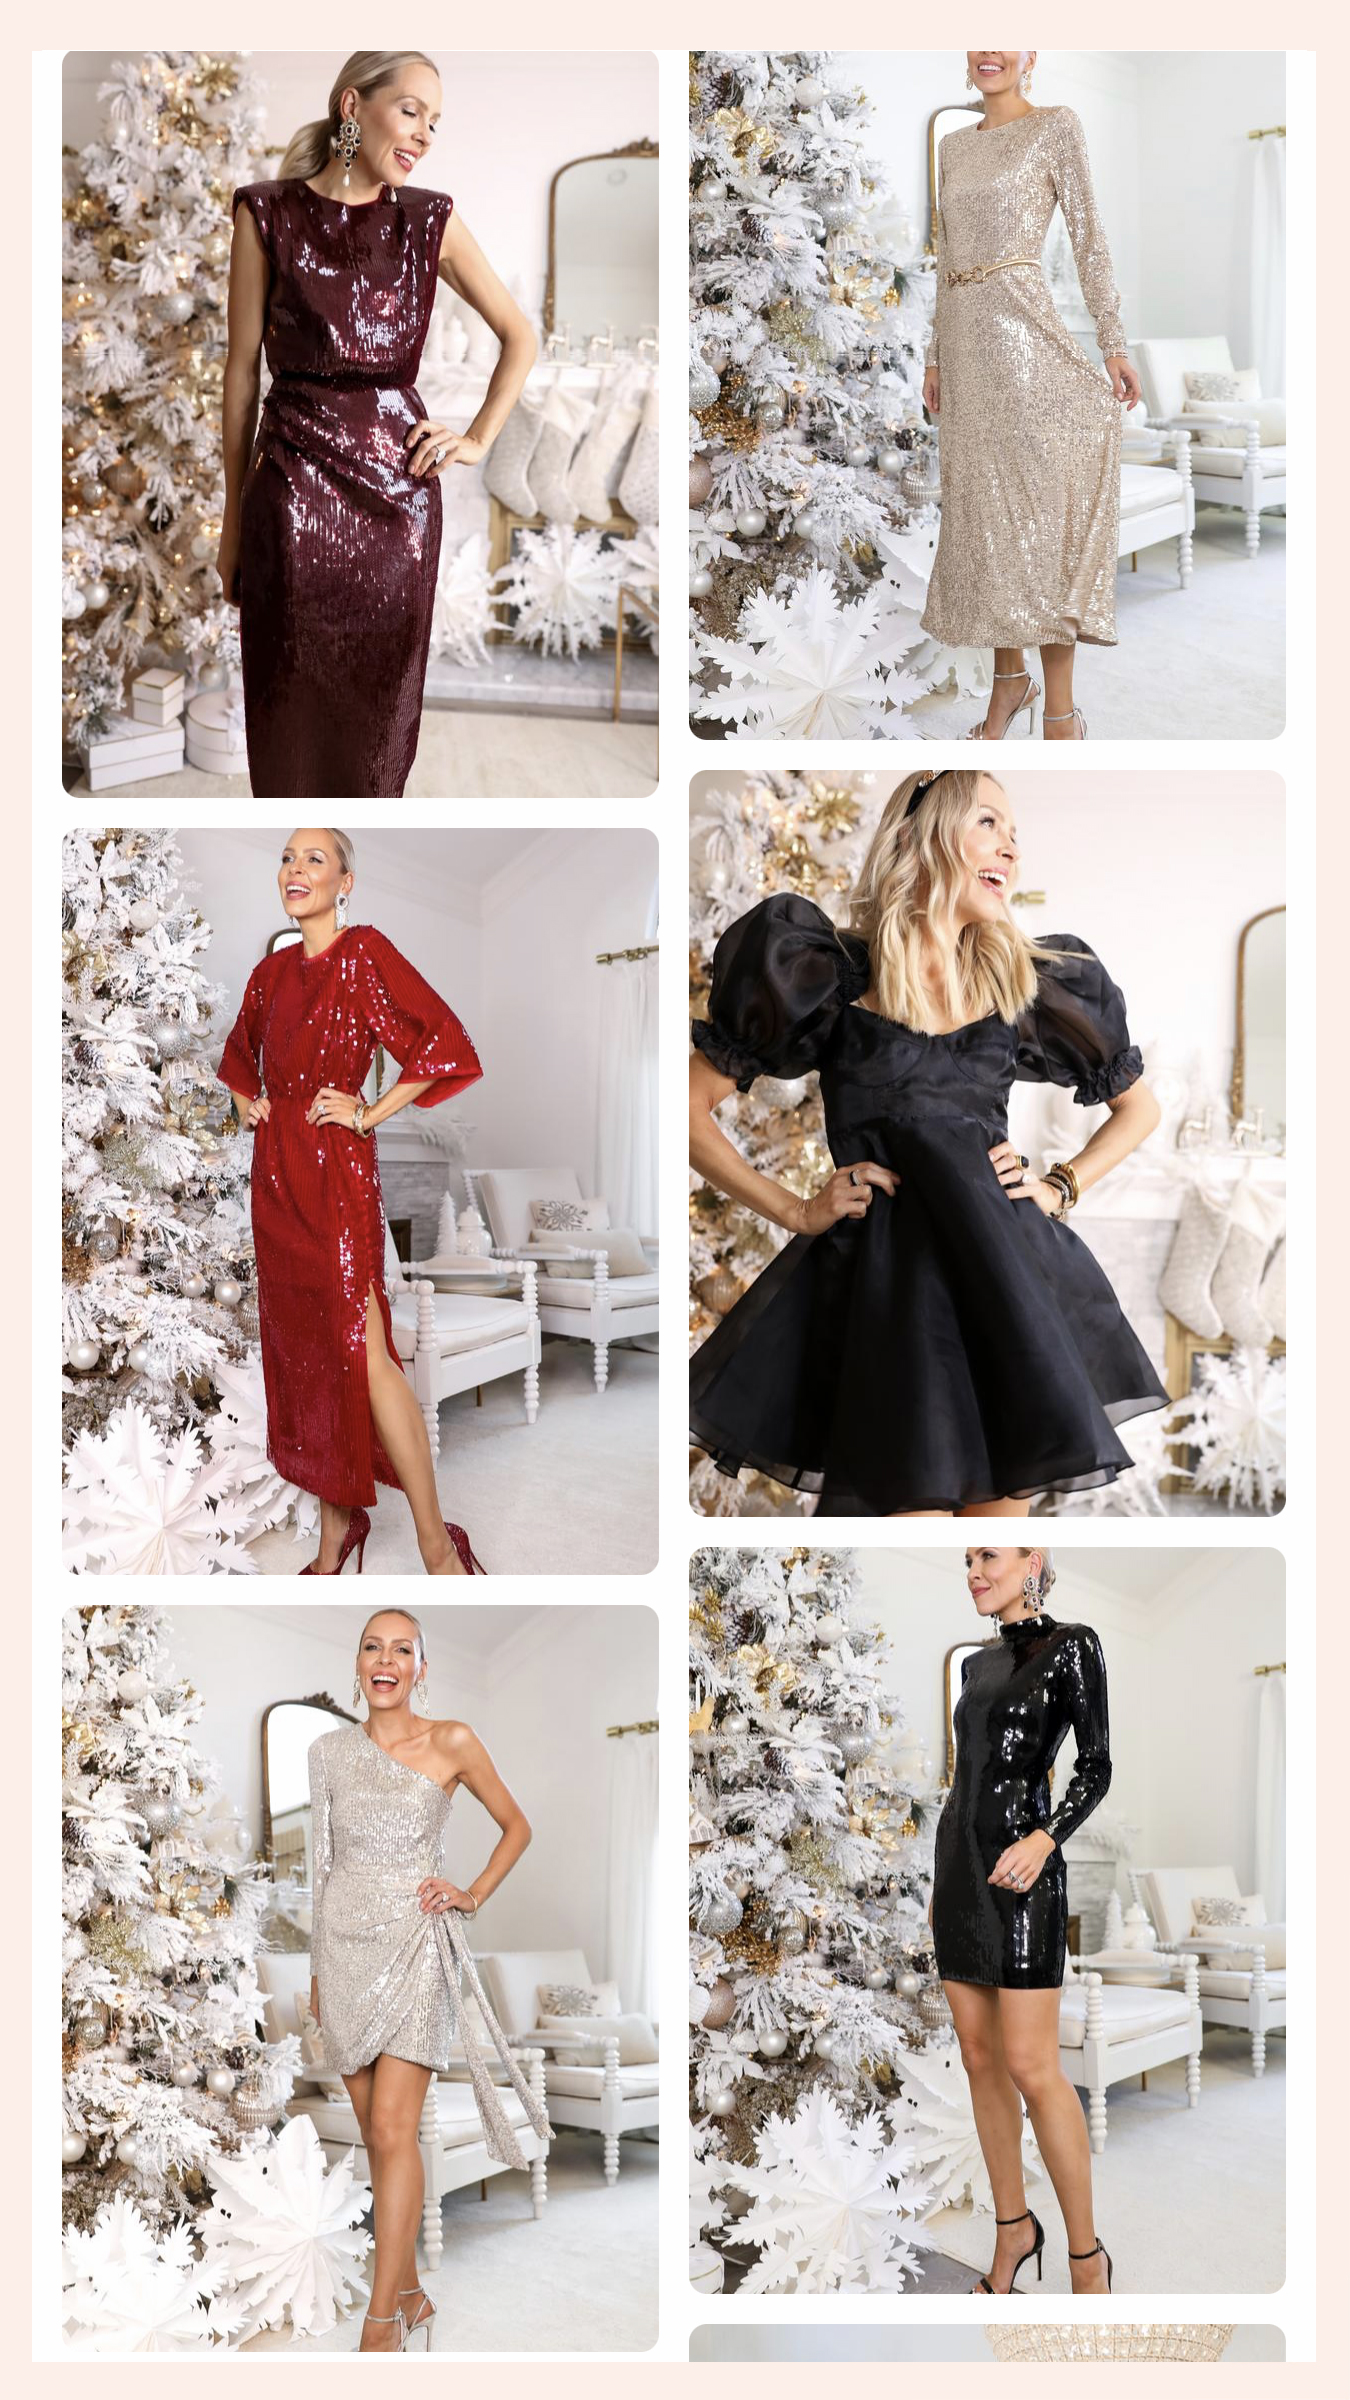 New Year’s Eve style inspiration, featuring eight looks from Express, Ann Taylor, J Crew and Anthropologie. By Lombard & Fifth, Veronica Levy.